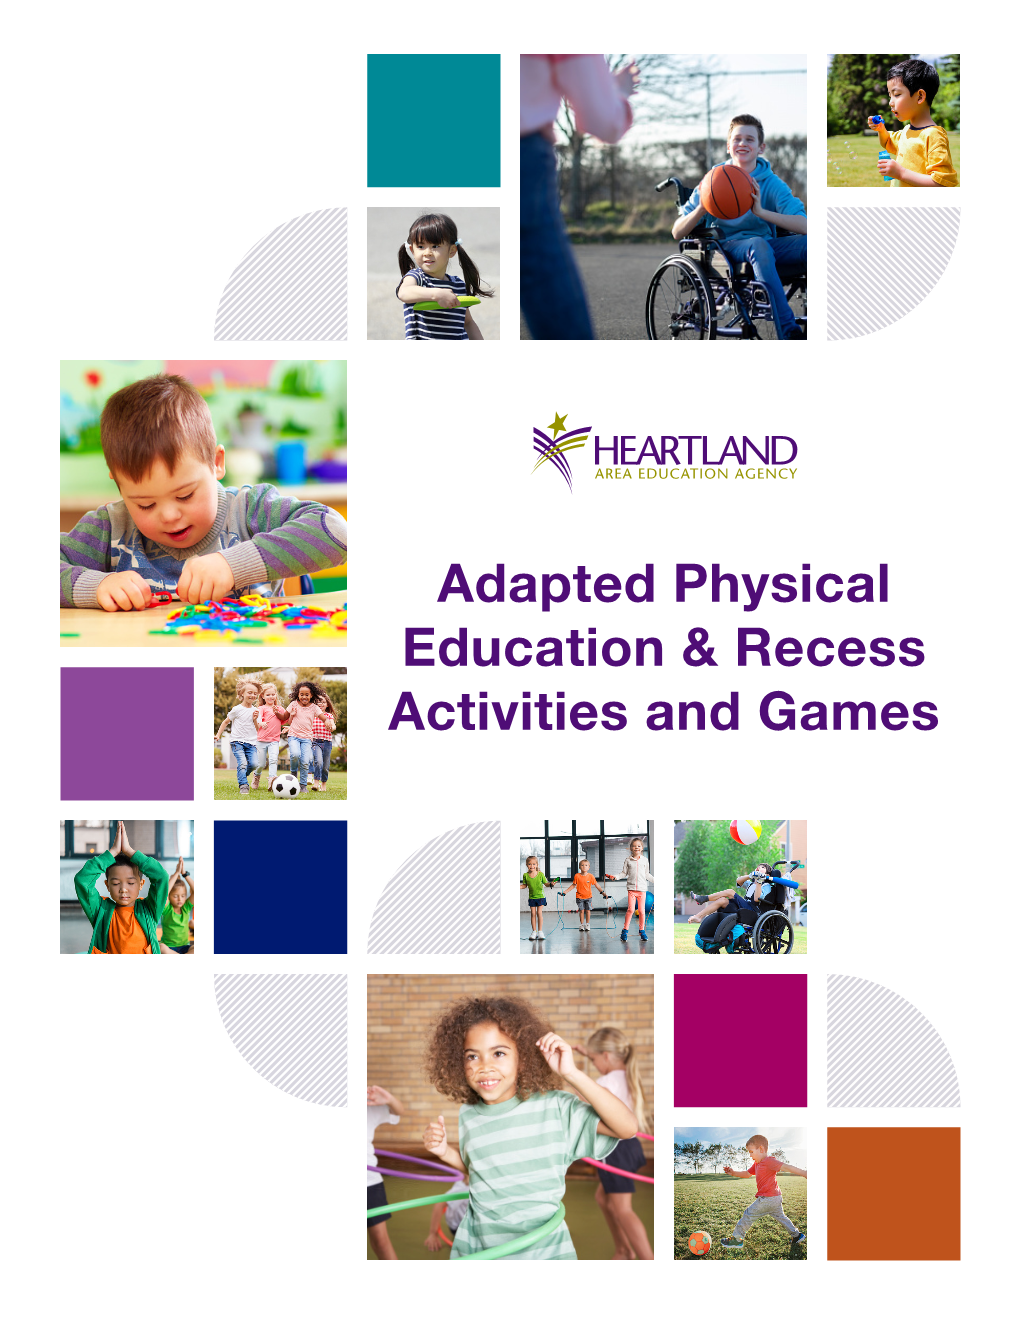 Heartland AEA Adapted Physical Education & Recess Activities and Games